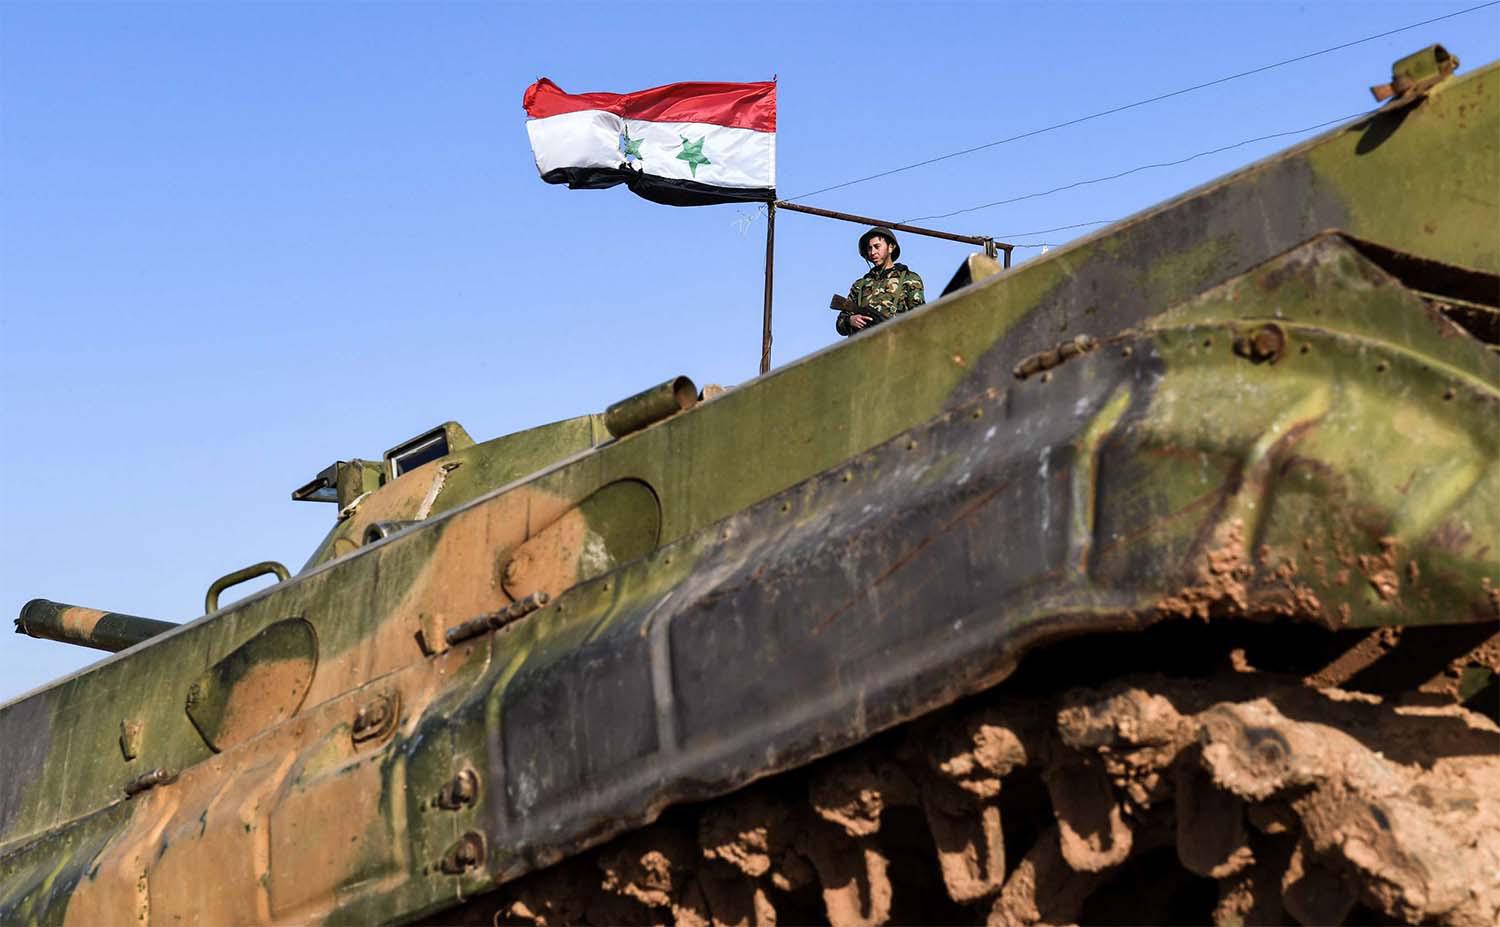 A Syrian soldier stands in a government forces' position near a deployed infantry-fighting vehicle